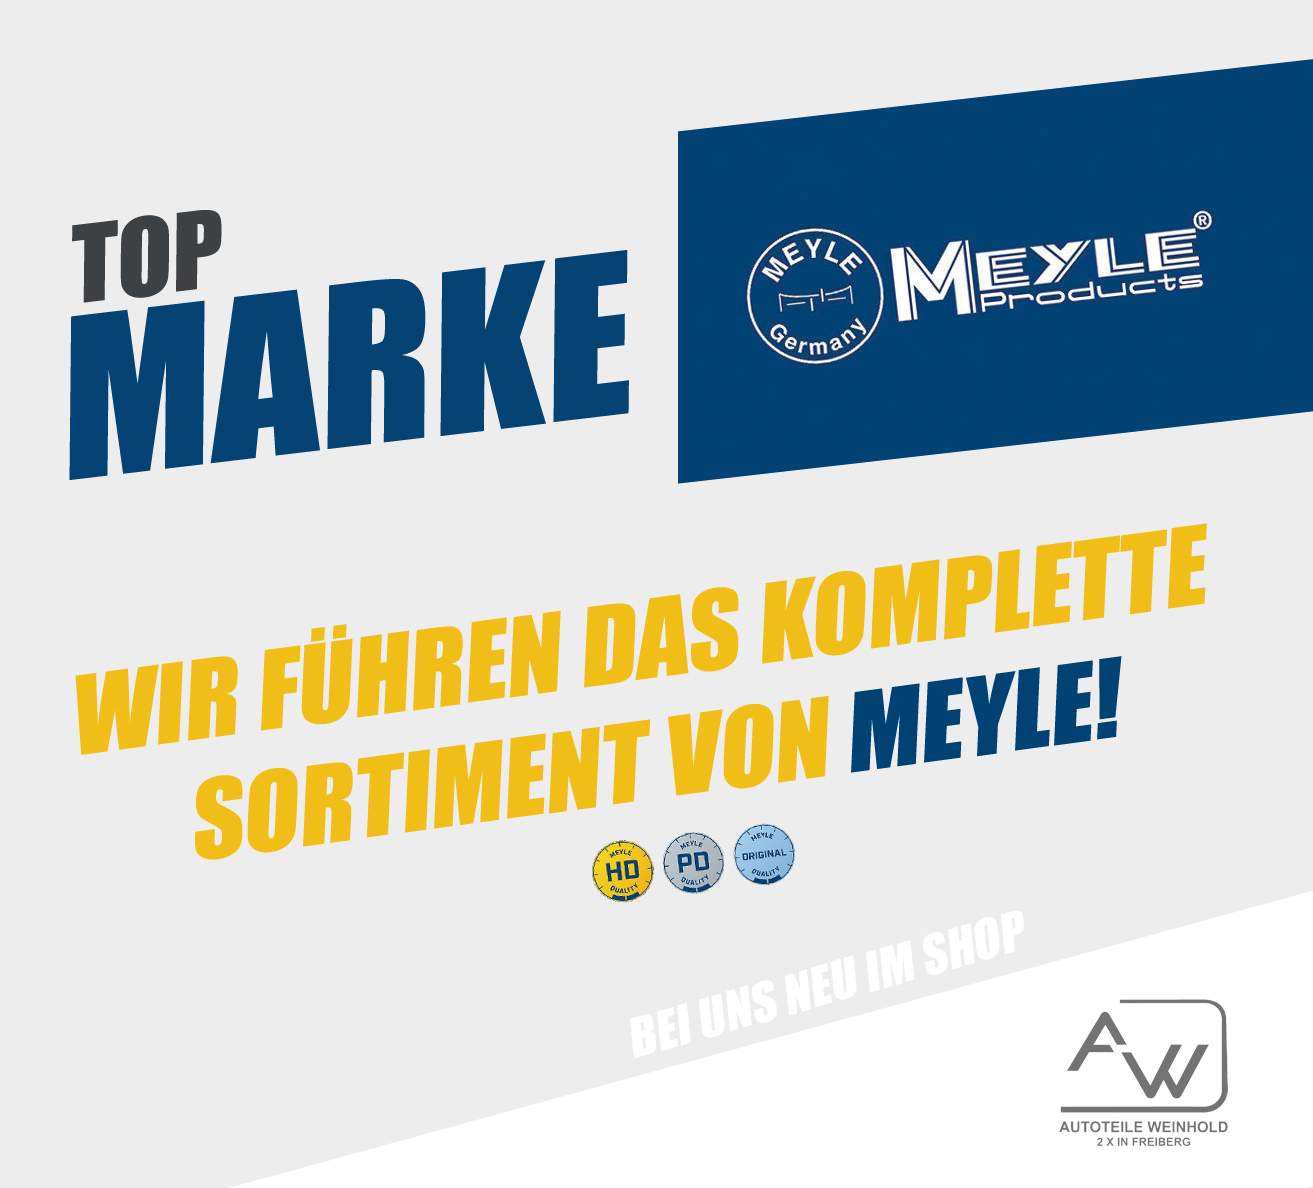 You are currently viewing TOP MARKE | MEYLE